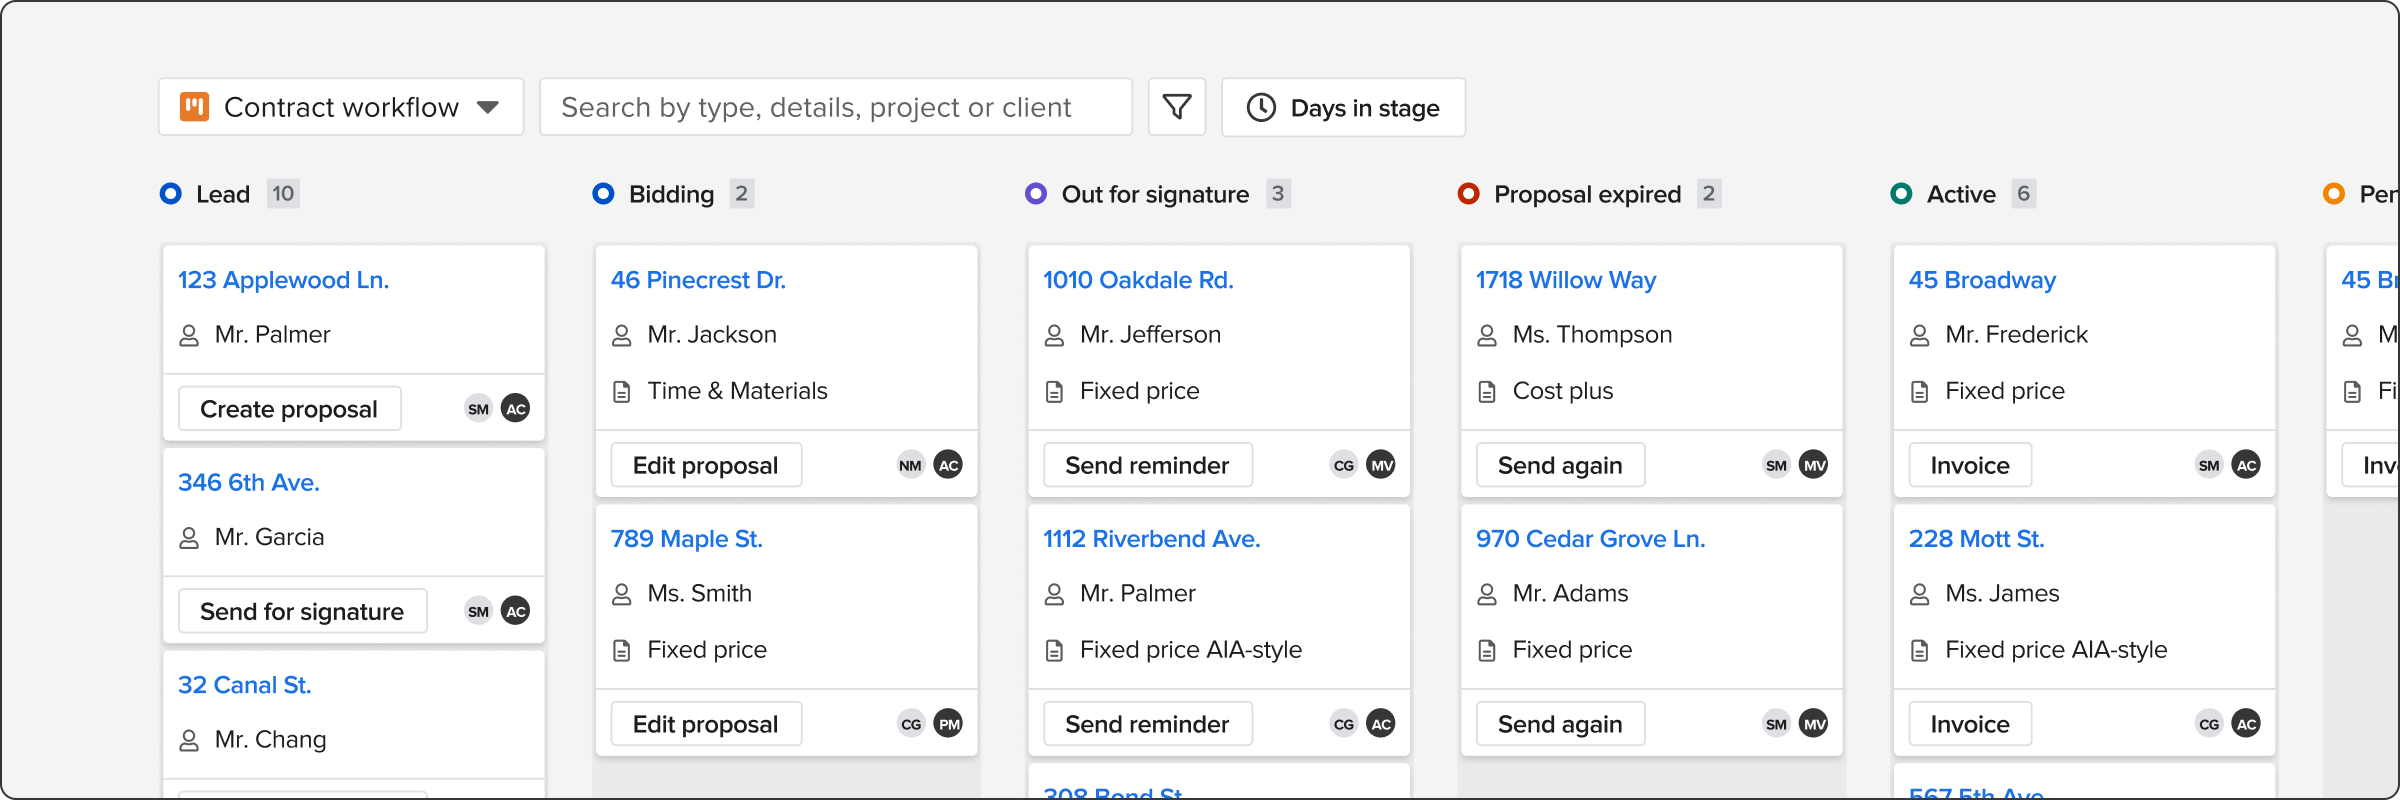 Project workflow view with the following states: Lead, Bidding, Out for signature, Proposal expired, Active, Pending change | Electrical contractor | Knowfy